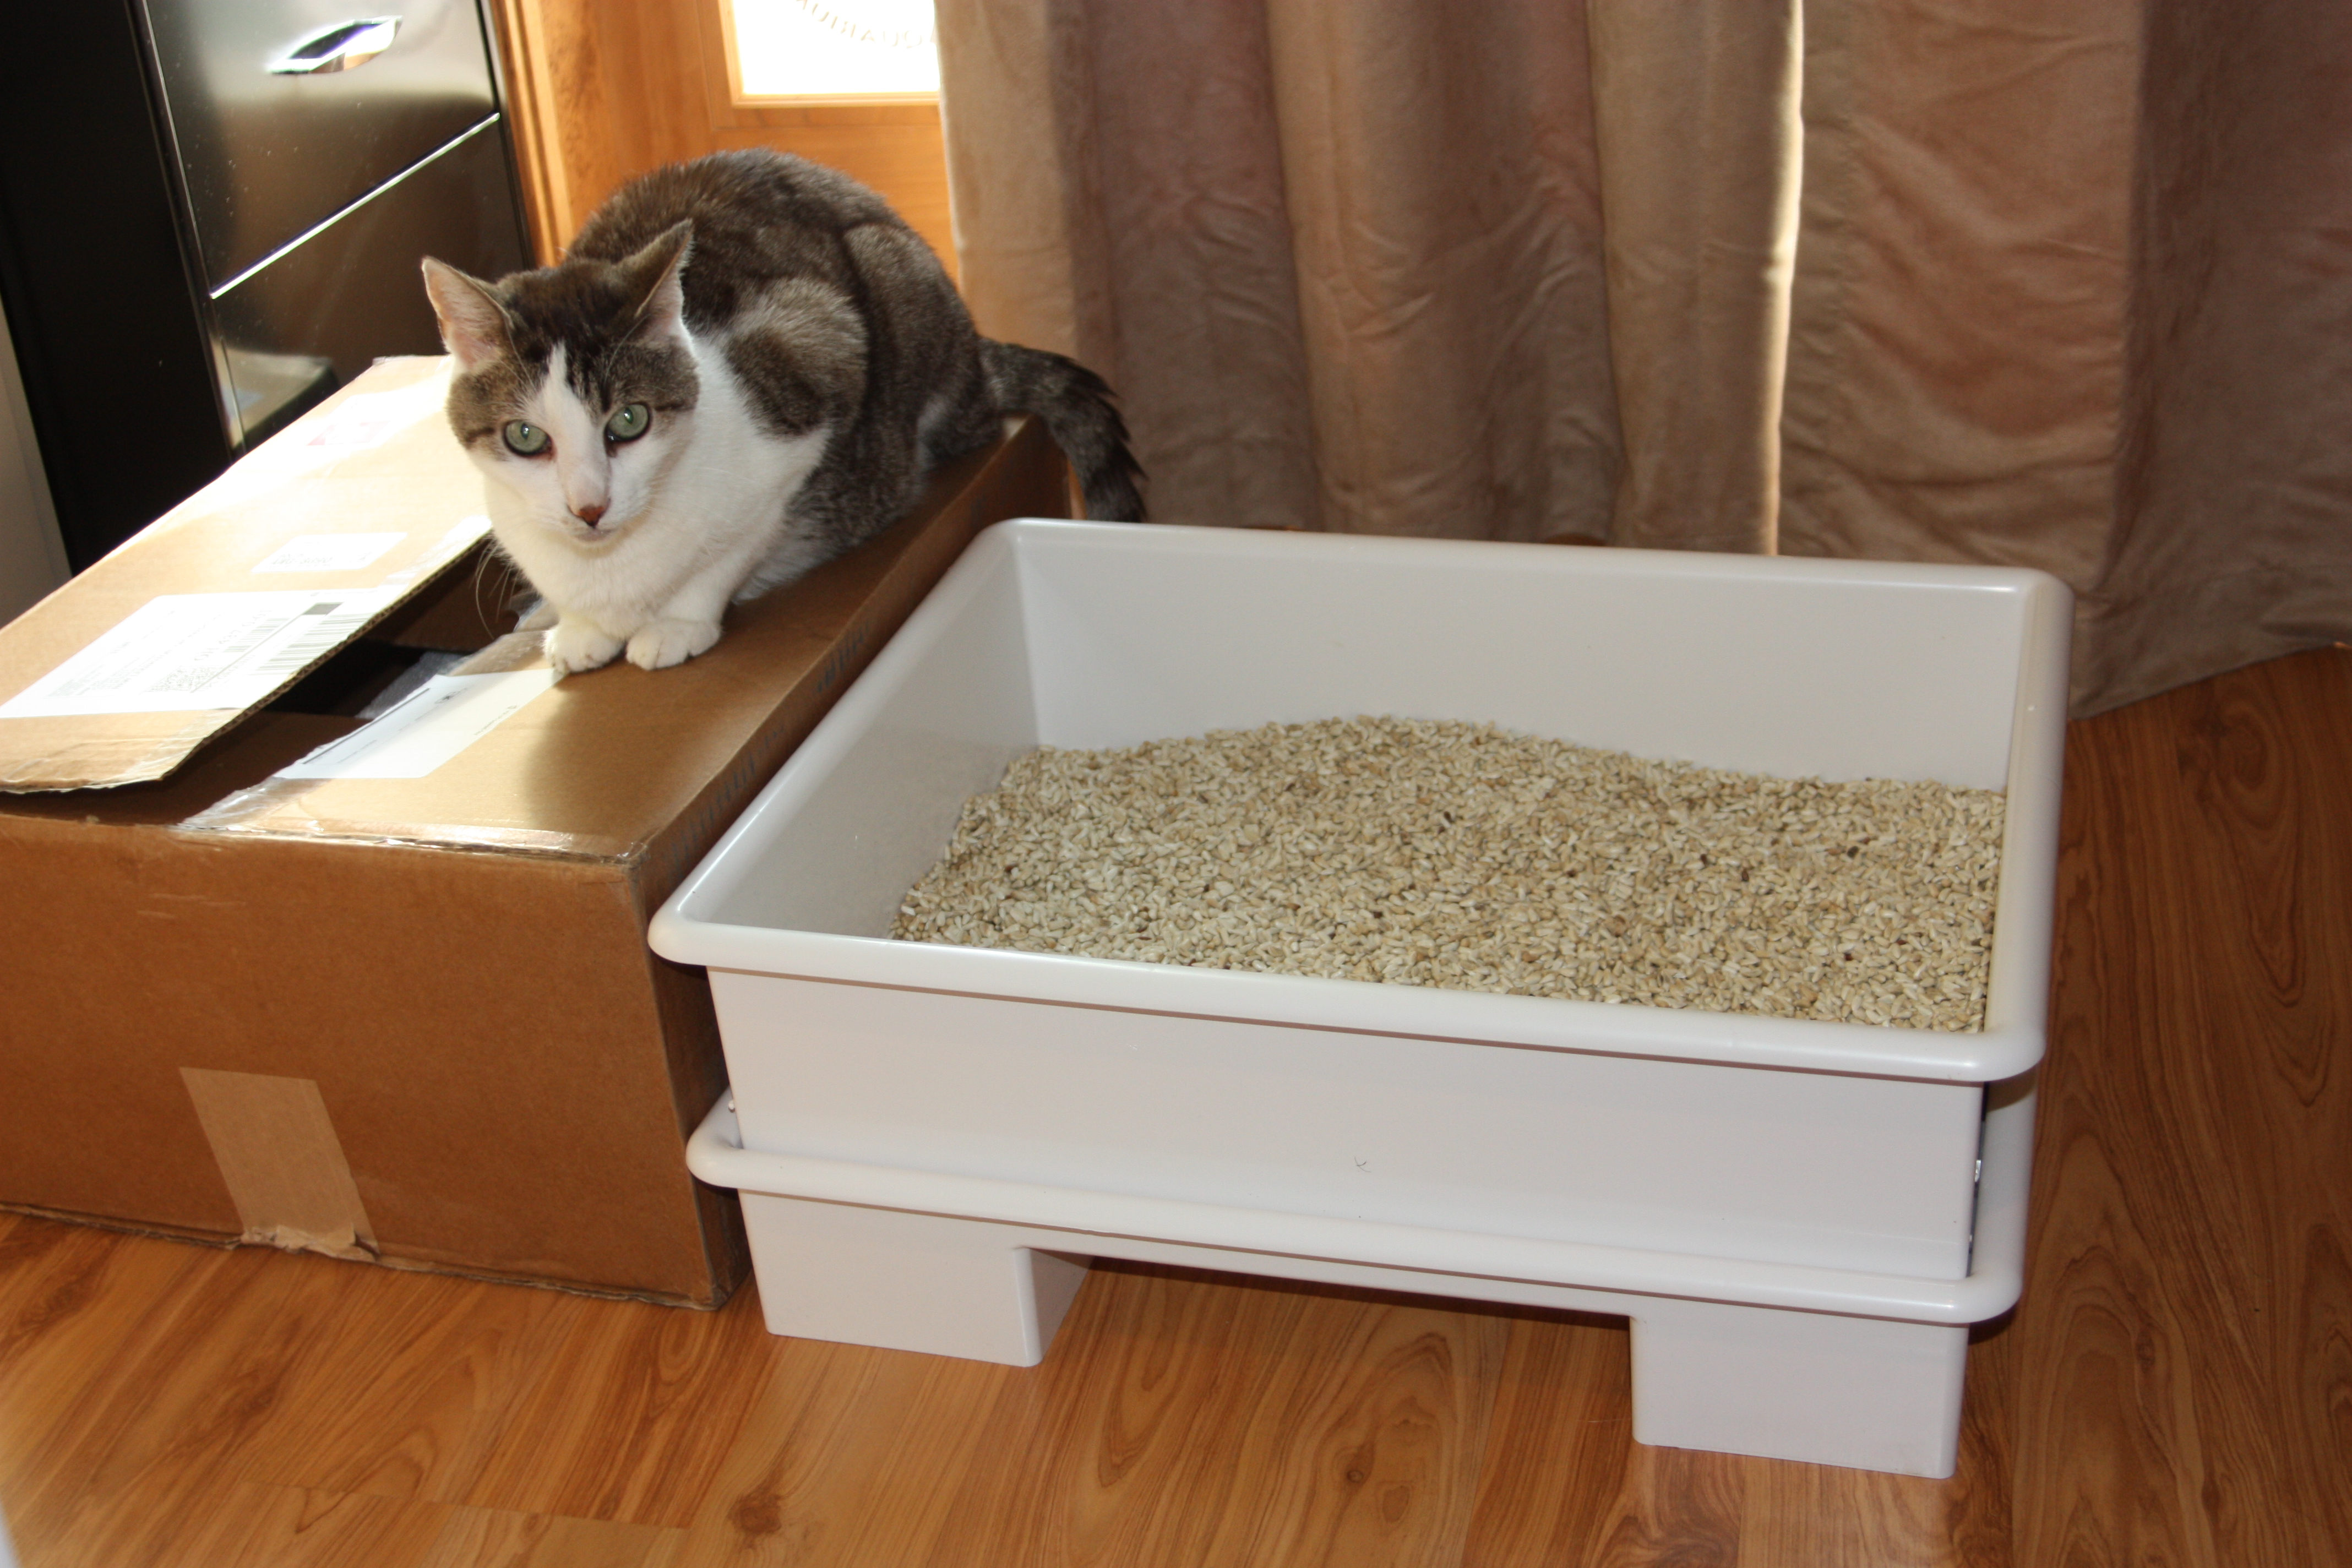 To Clump or Not To Clump? Try the Smart Cat Box